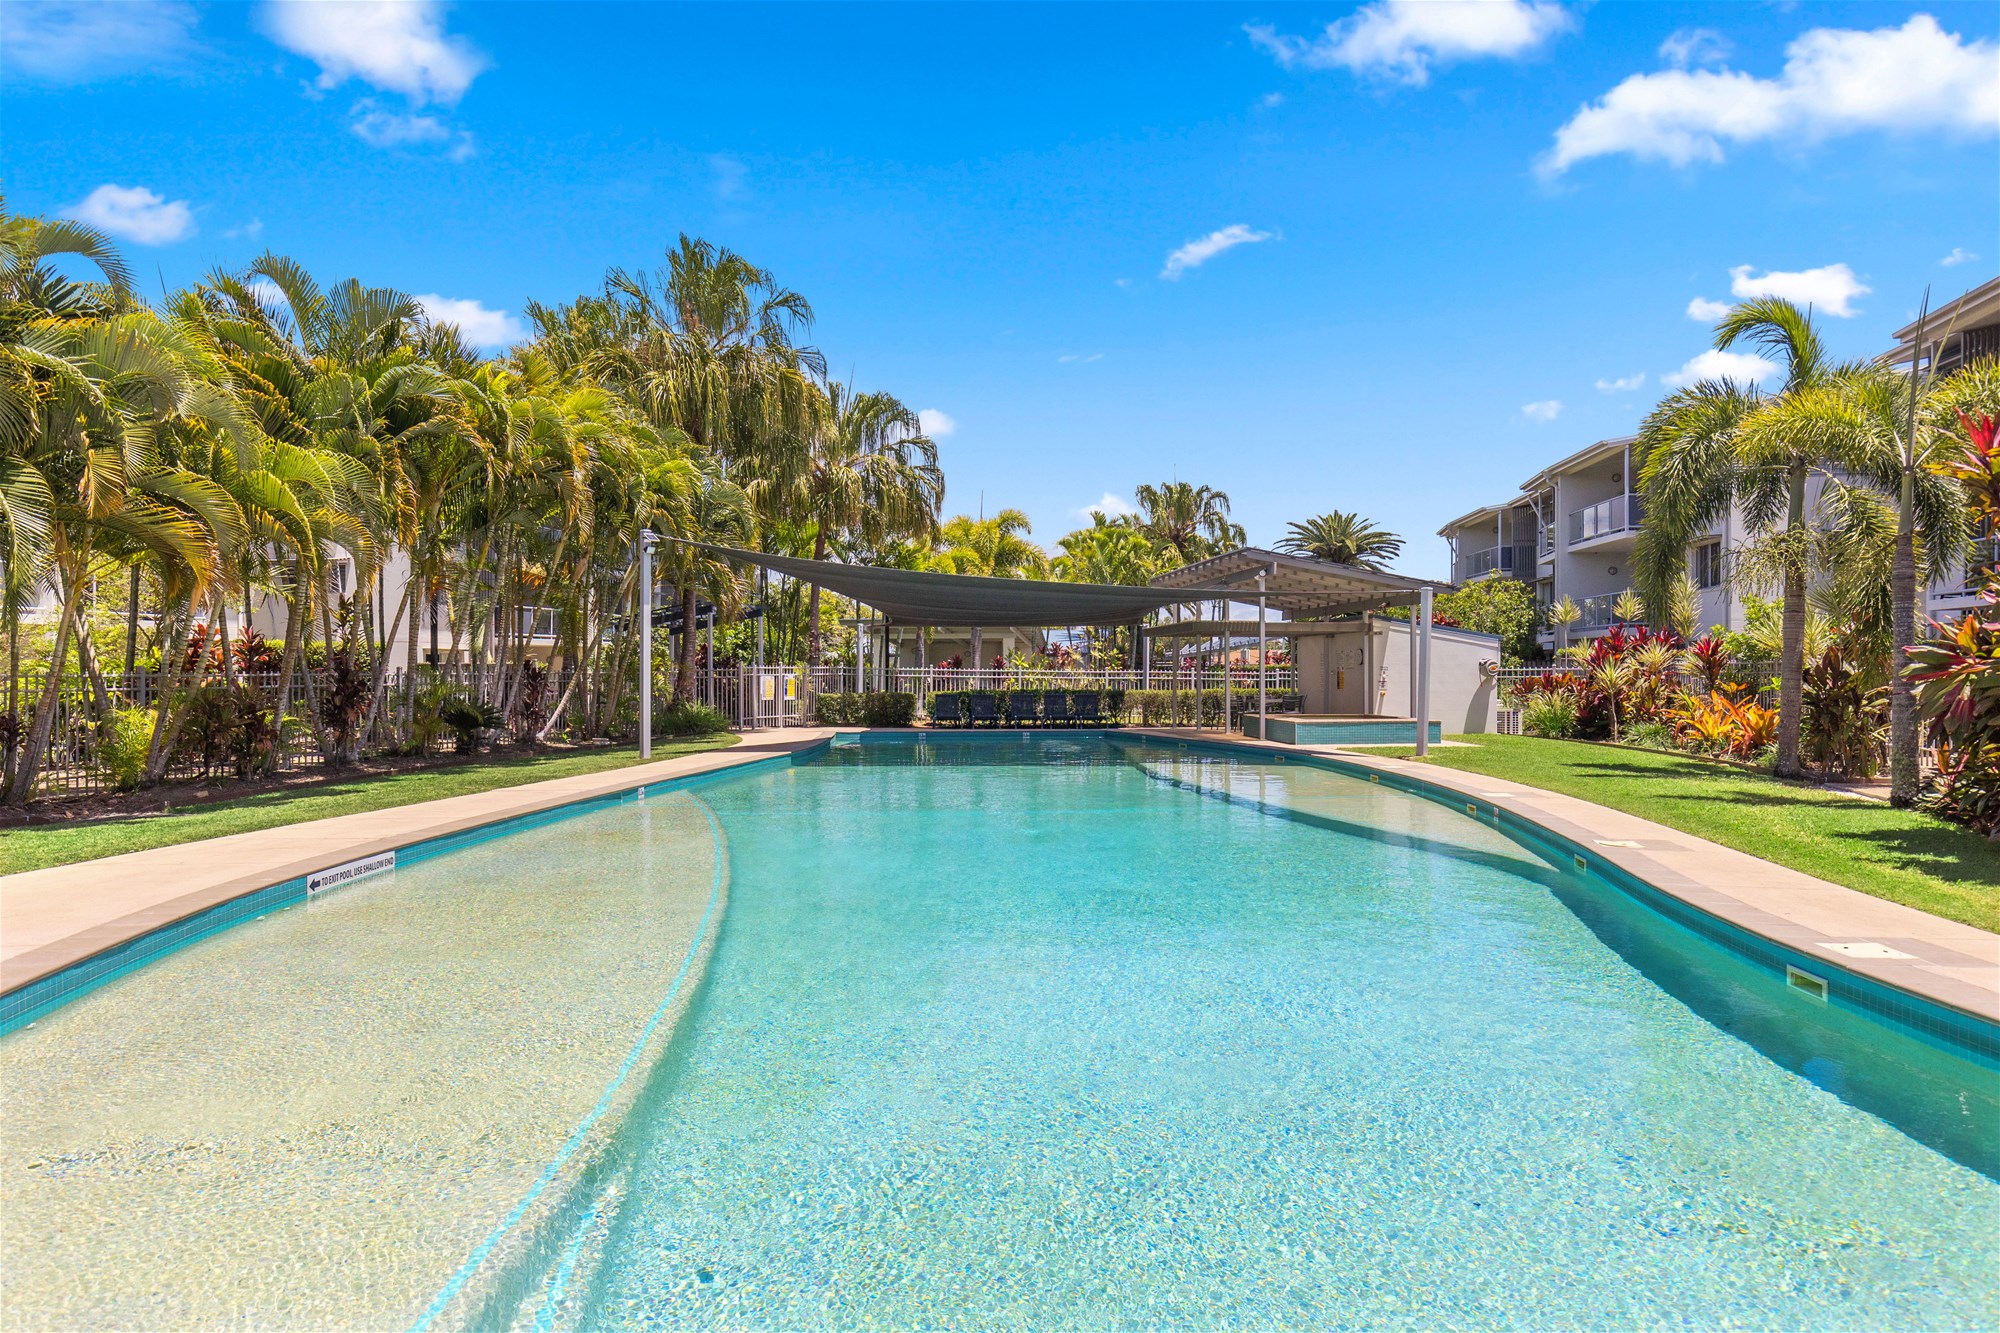 Secure Gated Resort Living – Close To Marina & Boat Club, Primary School & Shopping Centre